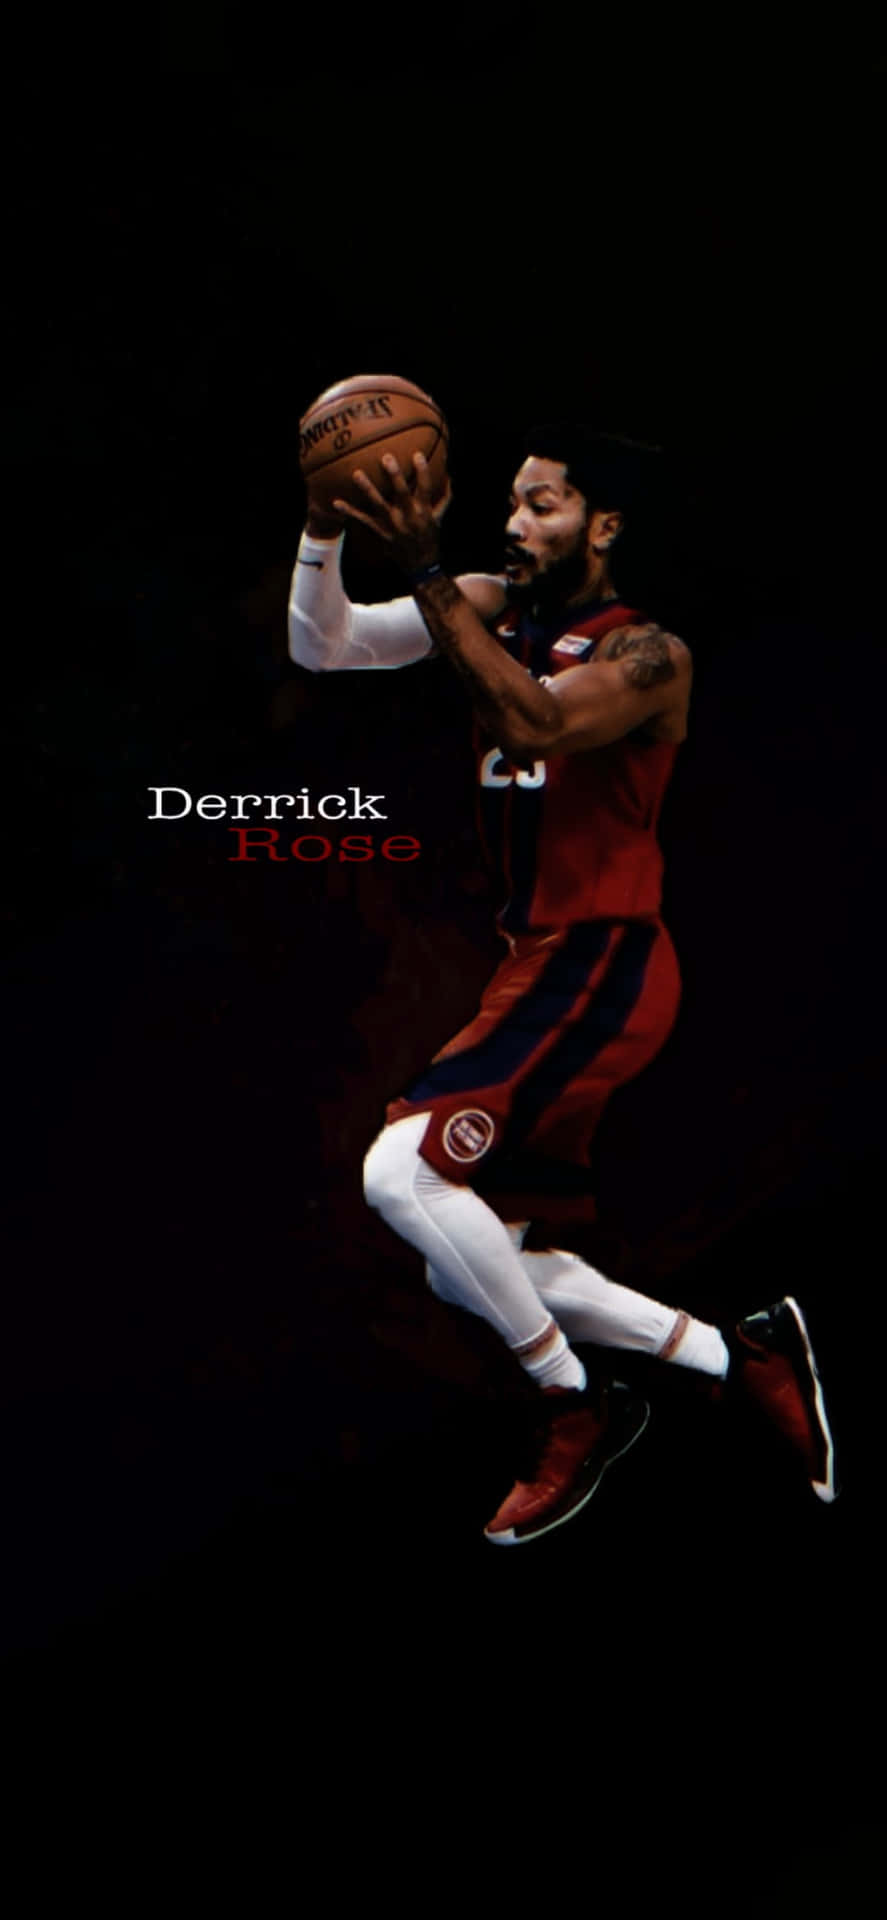 “Three-Time NBA All-Star Derrick Rose Takes the Court” Wallpaper